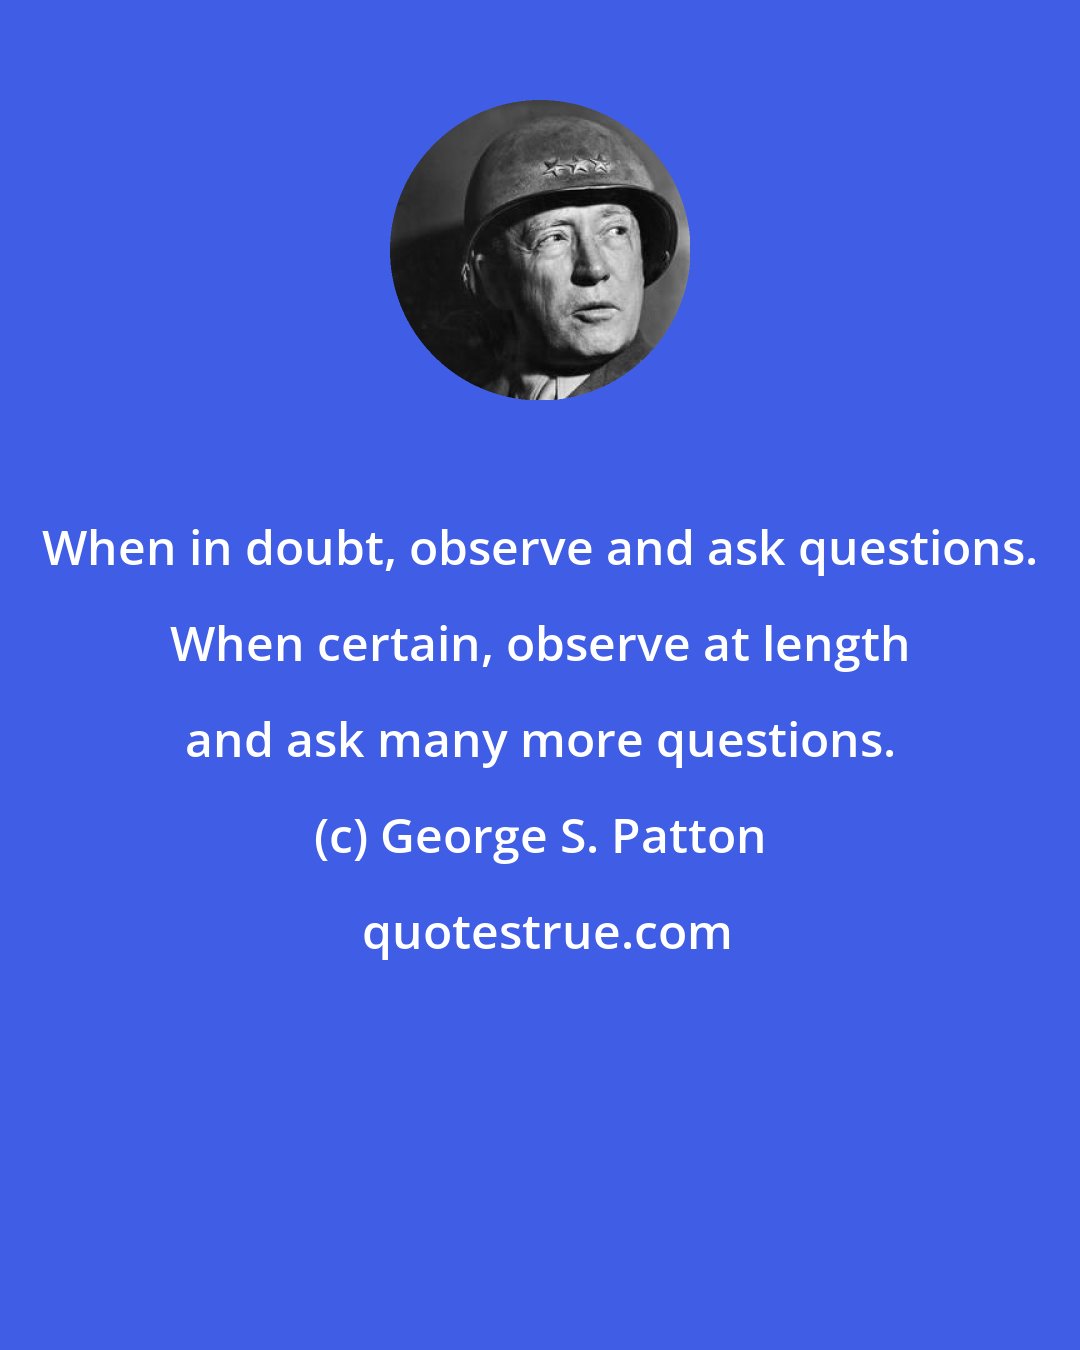 George S. Patton: When in doubt, observe and ask questions. When certain, observe at length and ask many more questions.